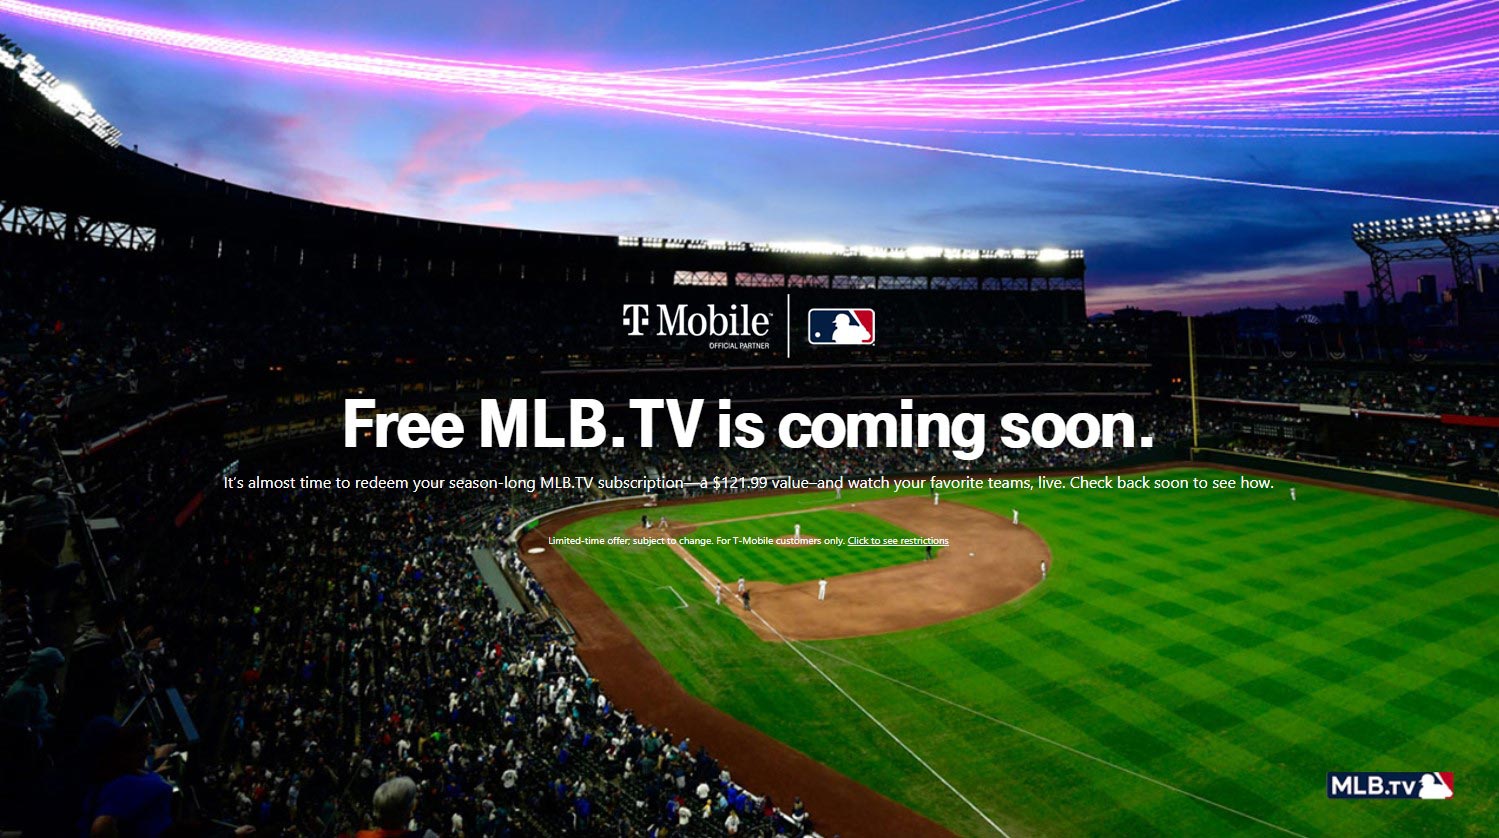 TMobile extends free MLBTV for subscribers through 2028  Engadget